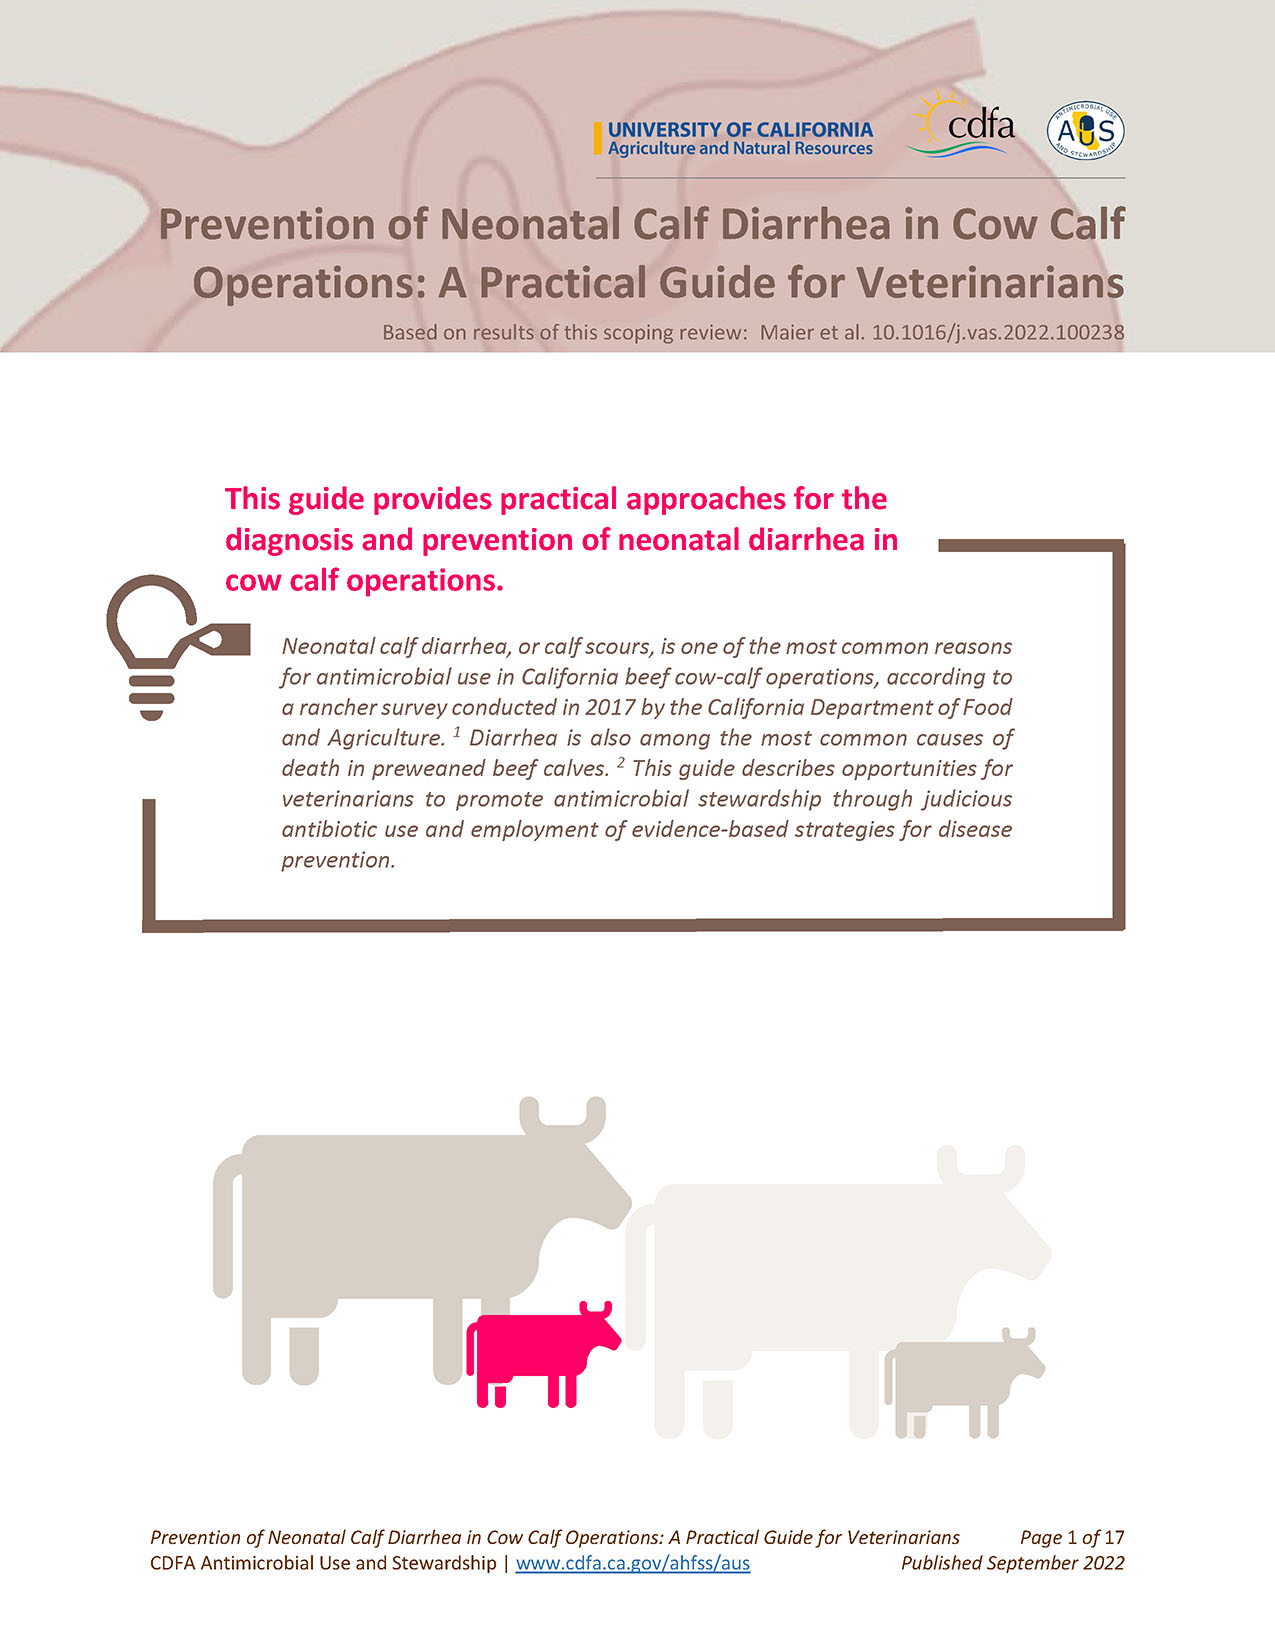 Cow Calf Scours: Strategies for Management thumbnail